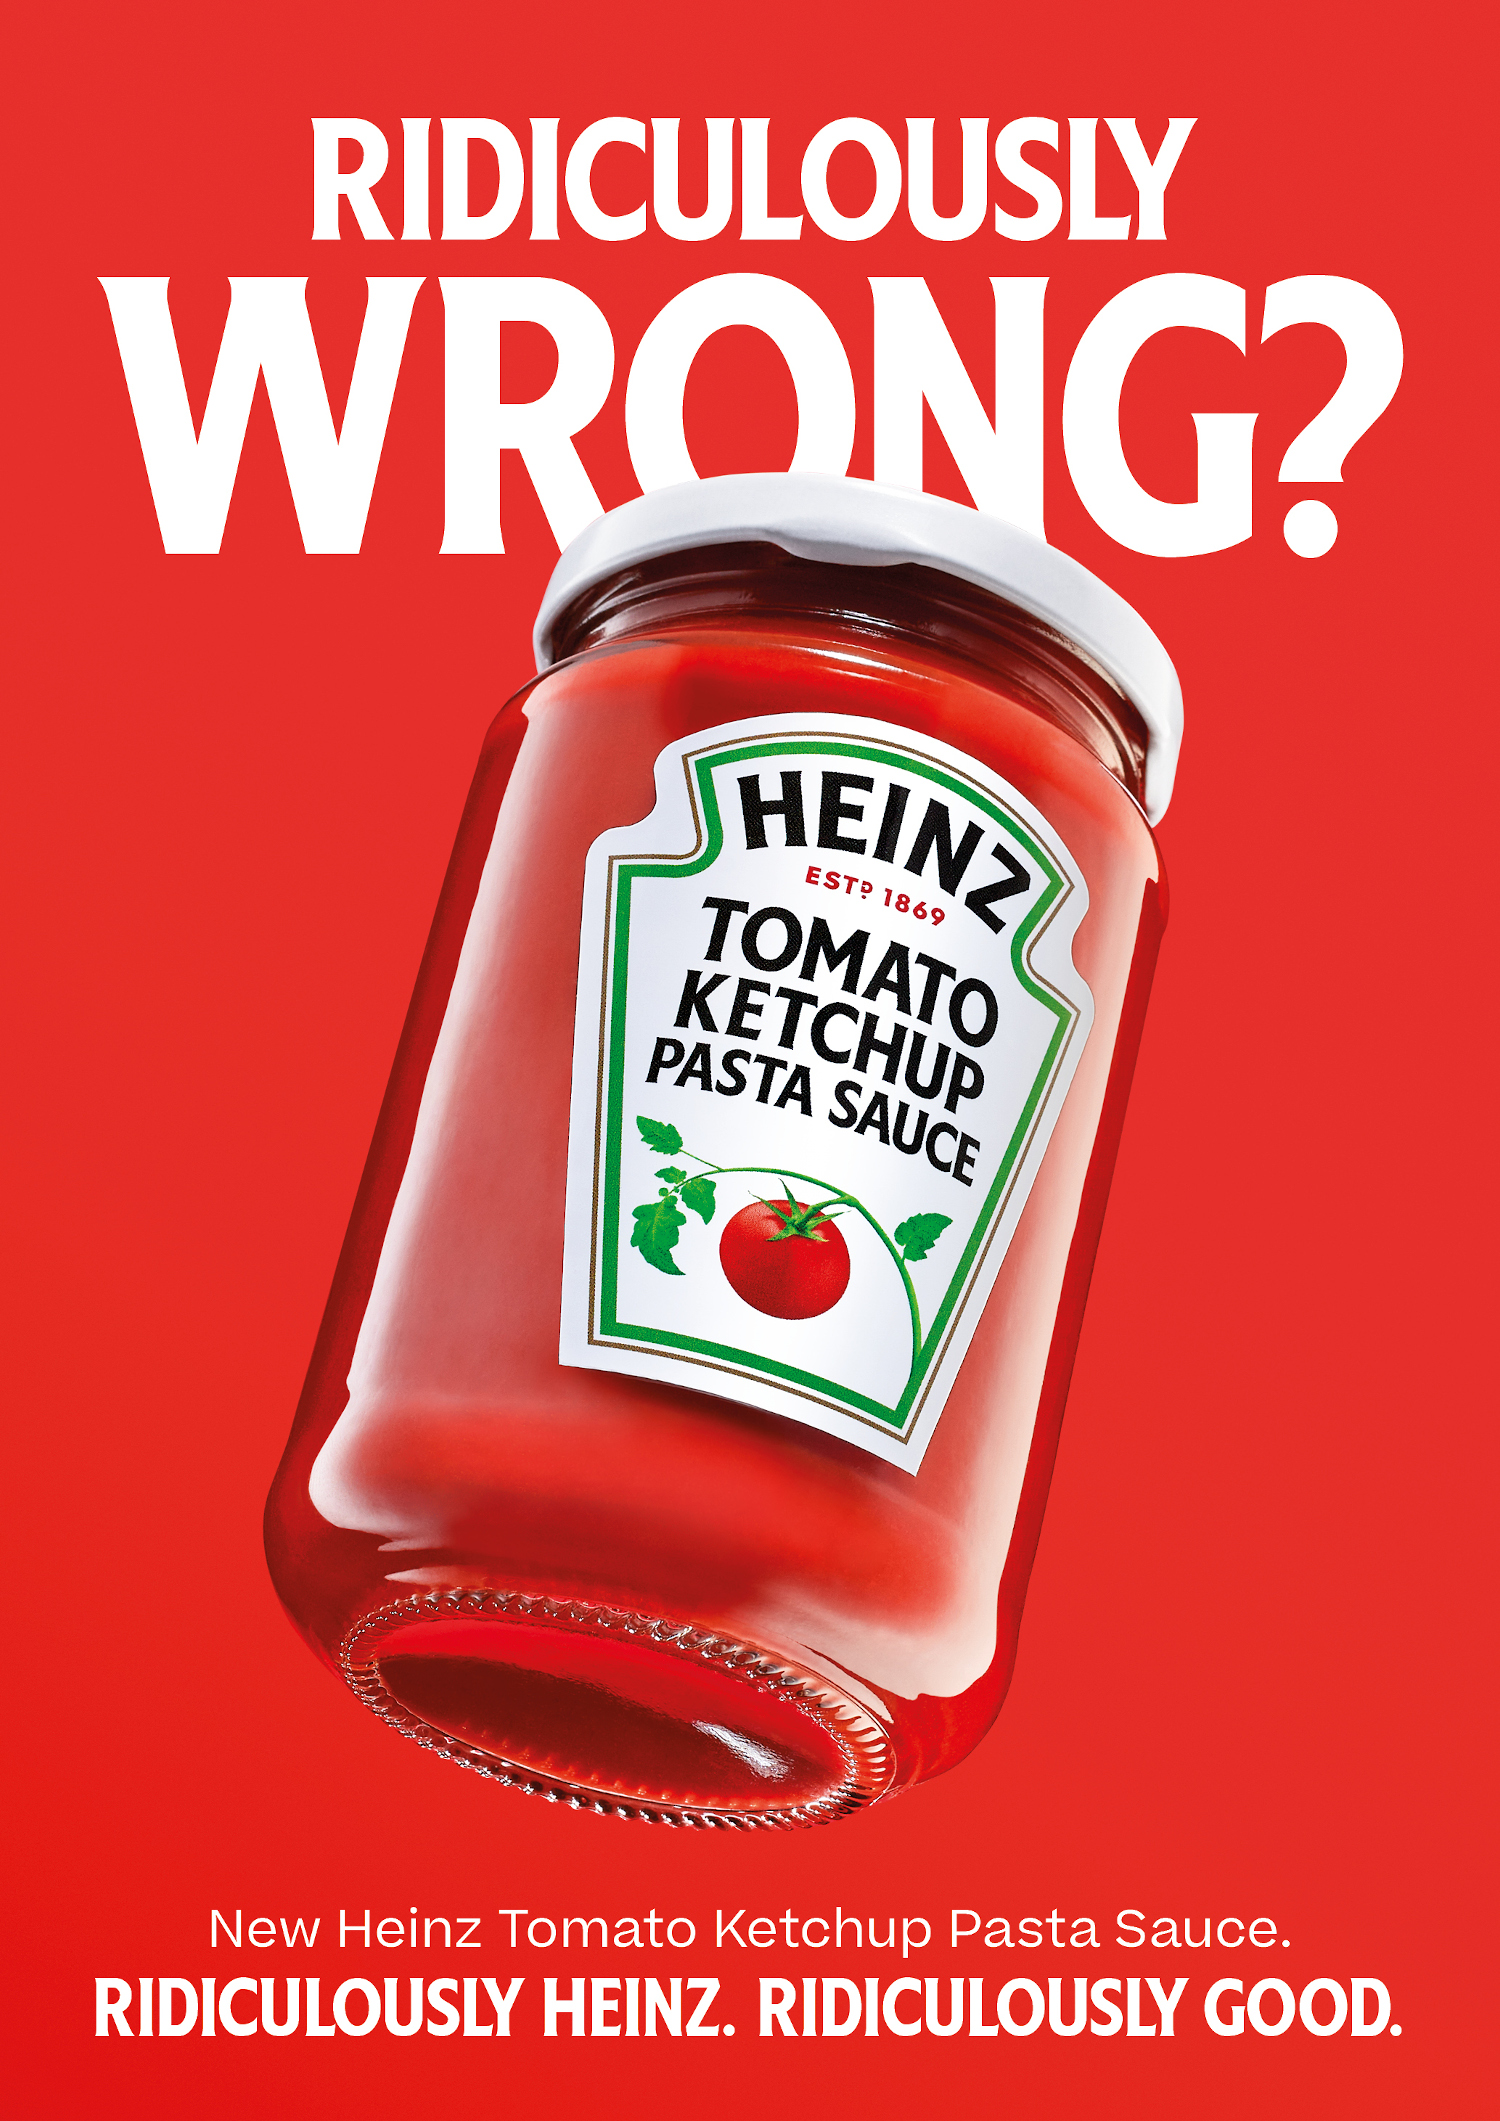 Heinz 1. Ridiculously wrong. Septiembre 2023